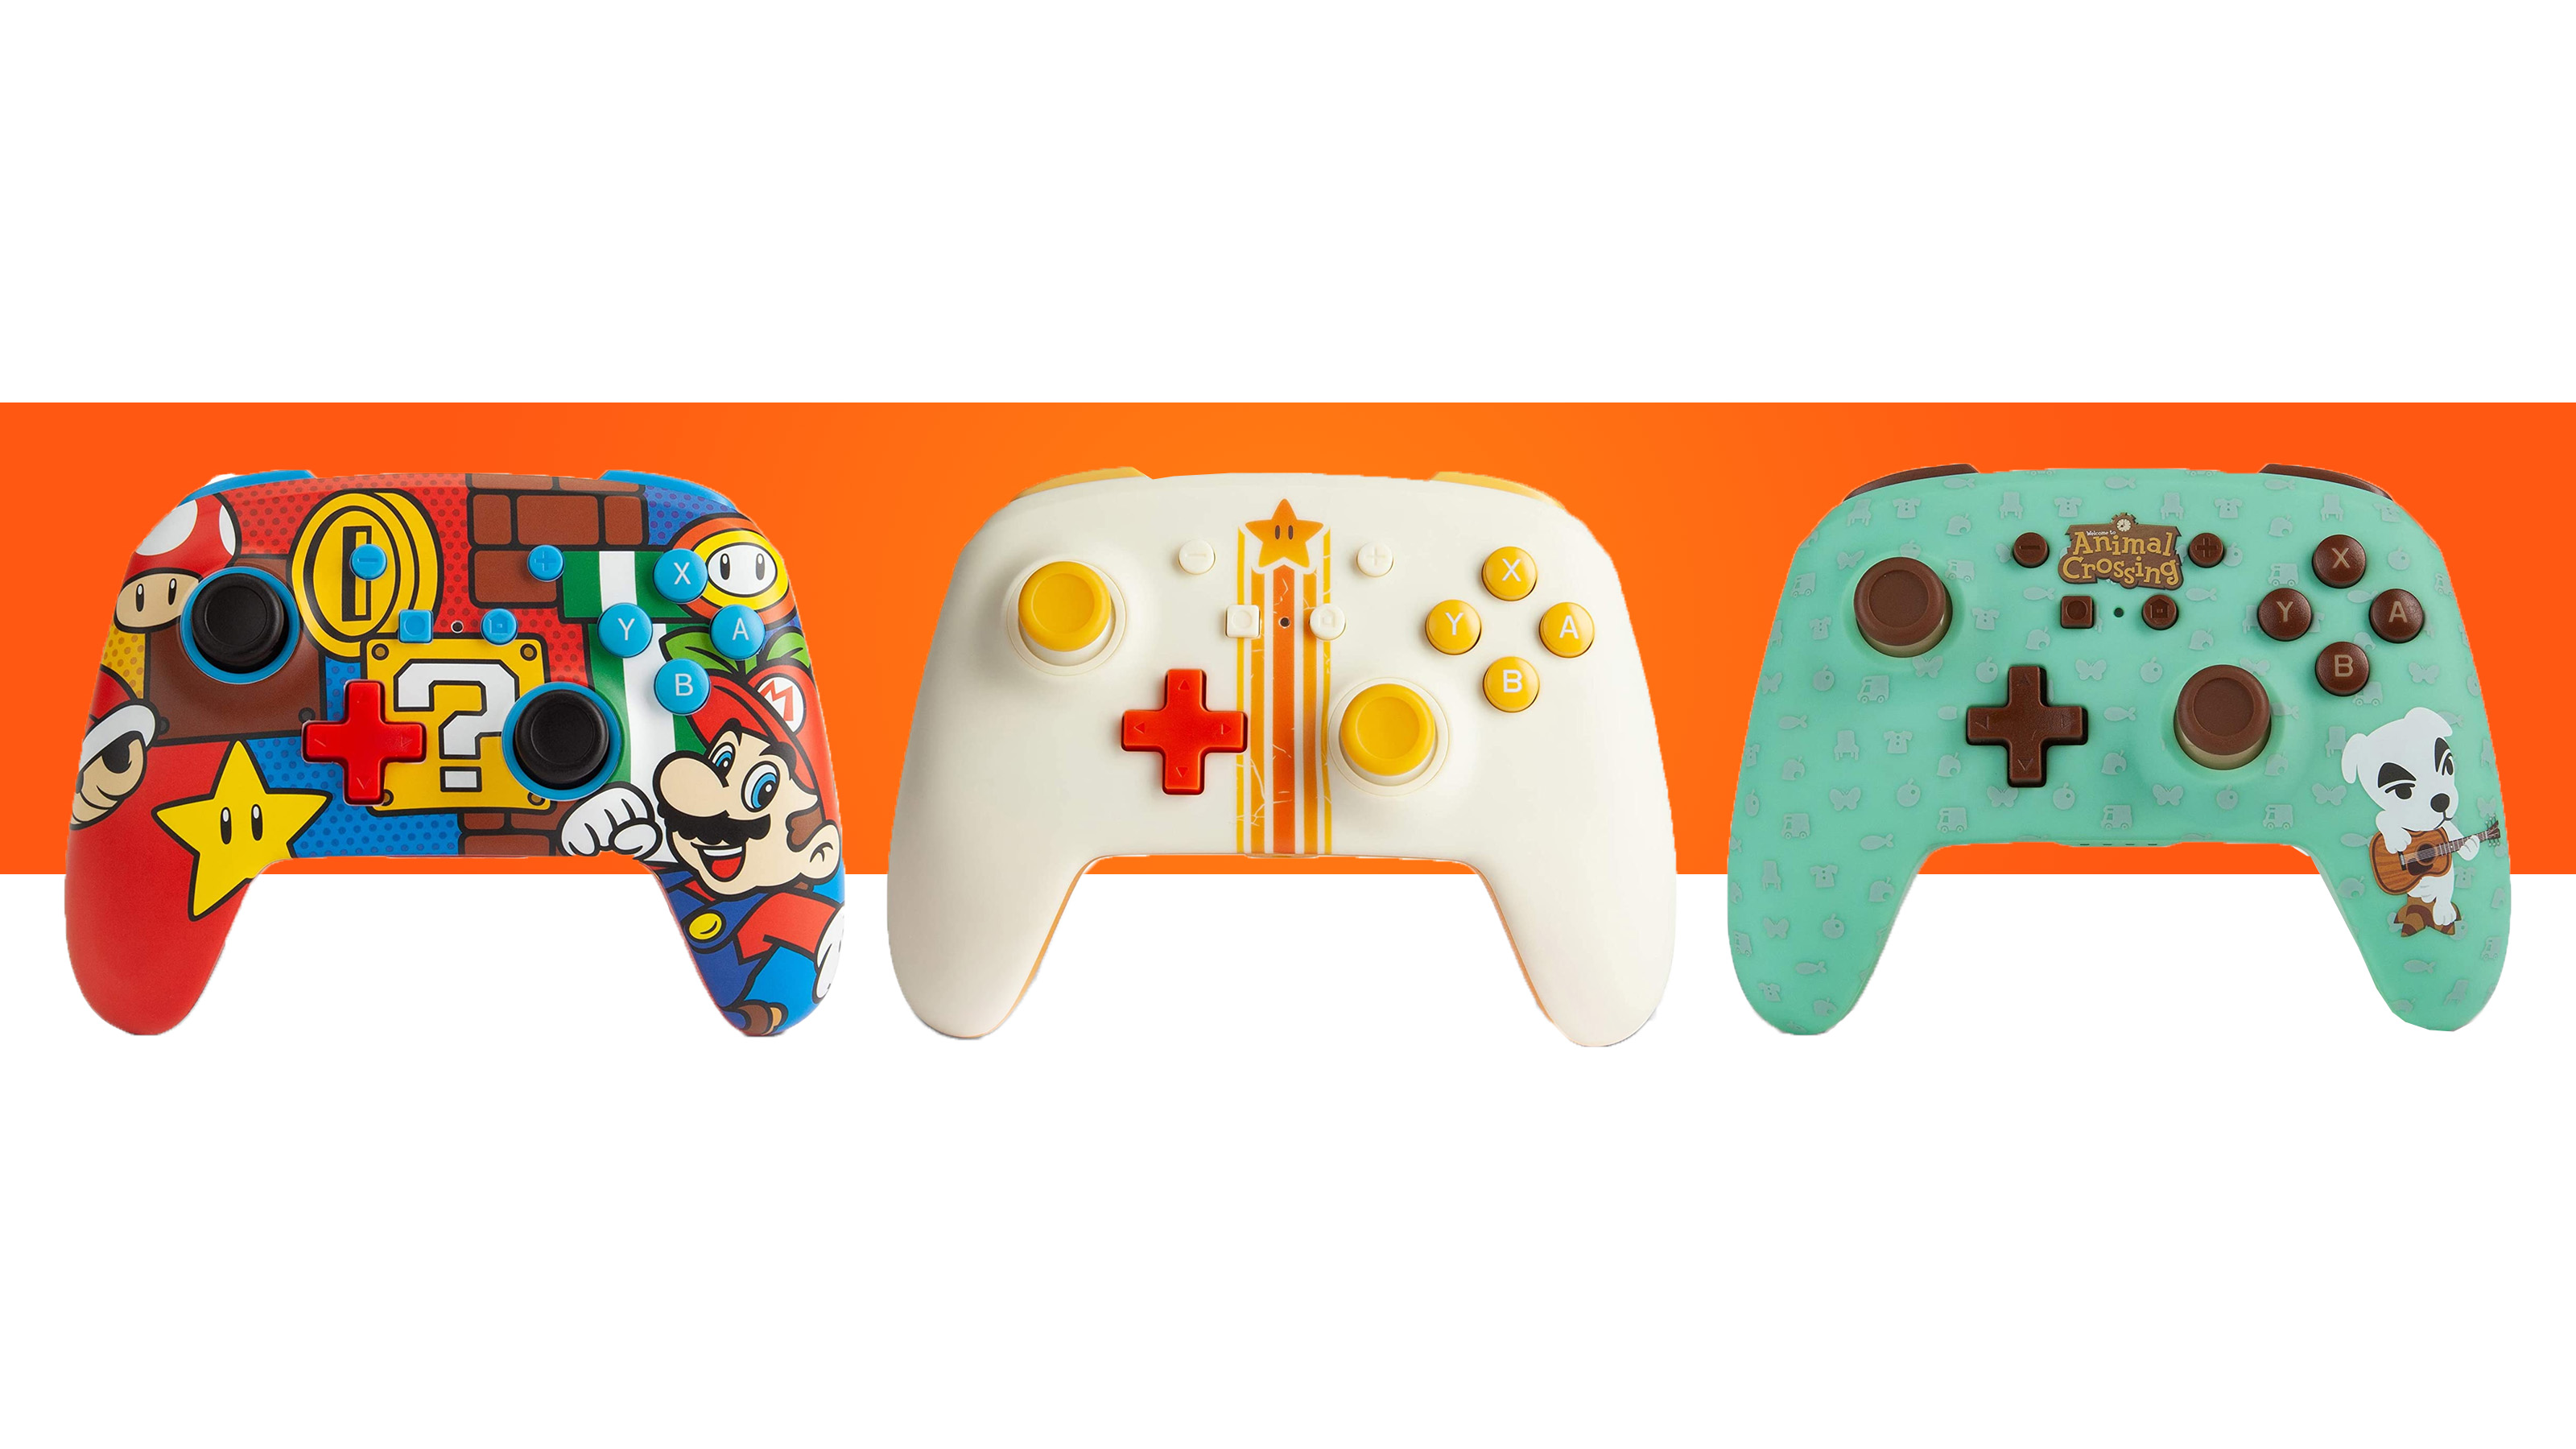 product shots of 3 PowerA Switch controllers with an orange background